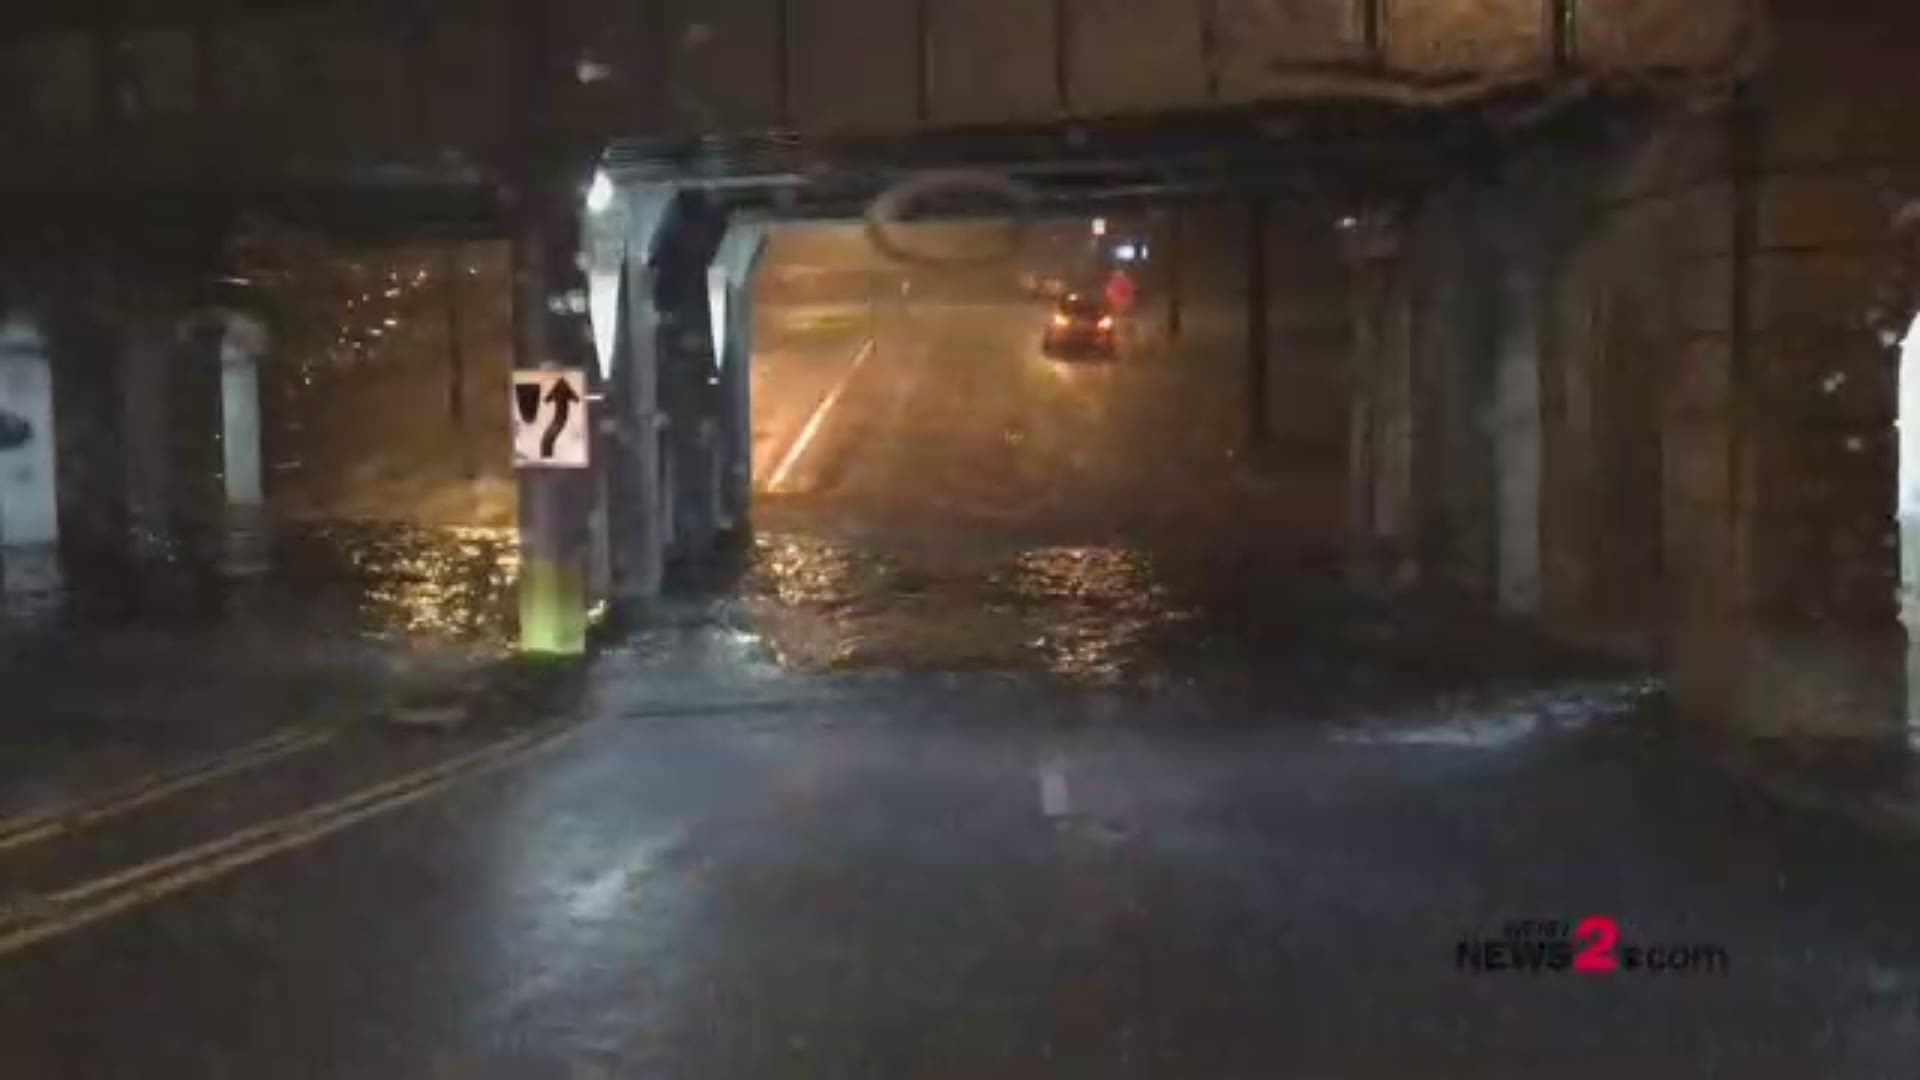 Drivers once again dealing with flooded streets in Greensboro from another storm.